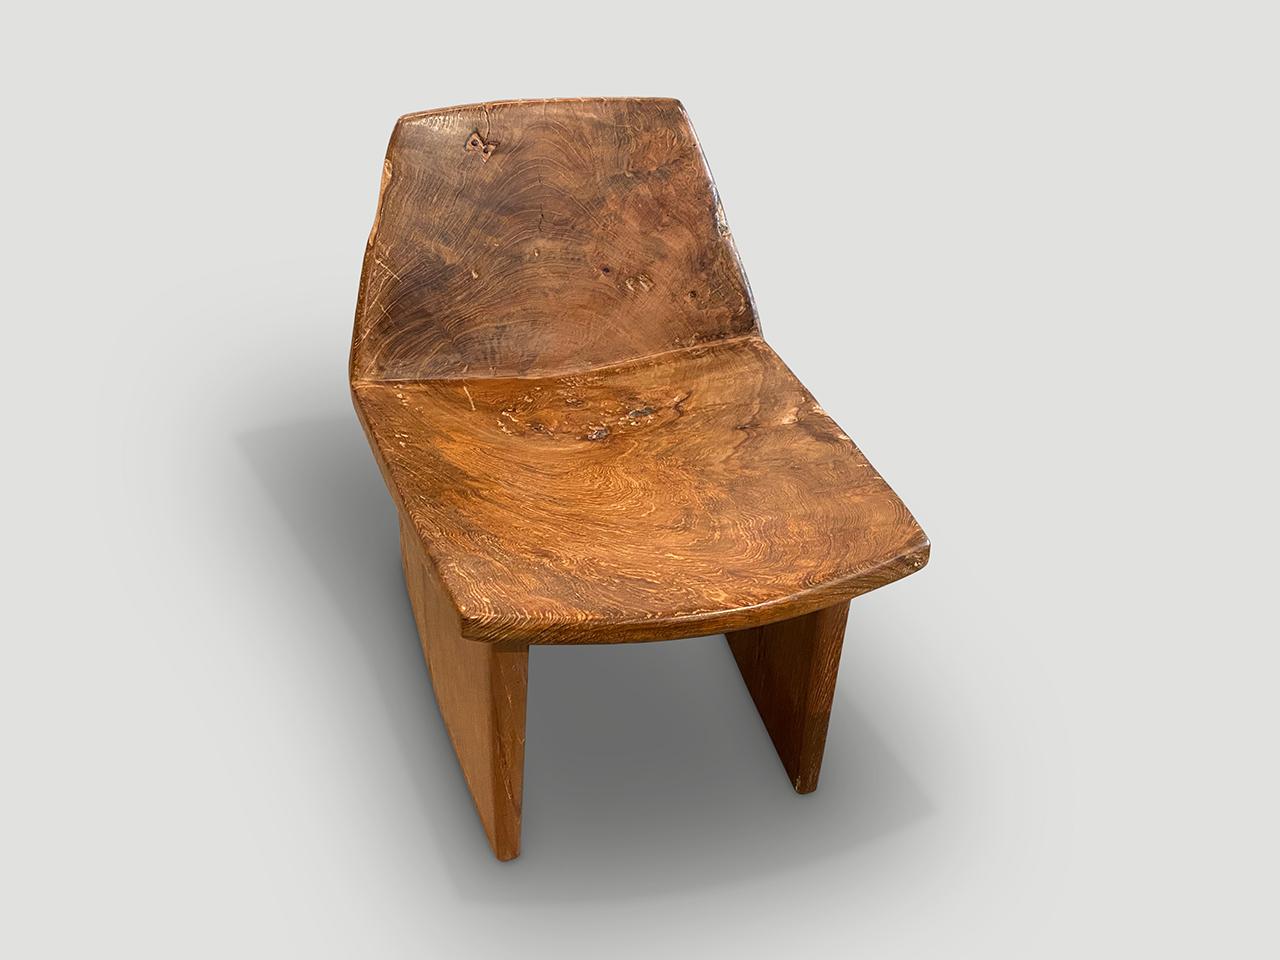 The seat and back rest are hand carved from a single piece of aged teak wood with lovely patina. We added minimalist legs and a tiny wood butterfly inlaid in to the back. It’s all in the details. Full dimensions; 17